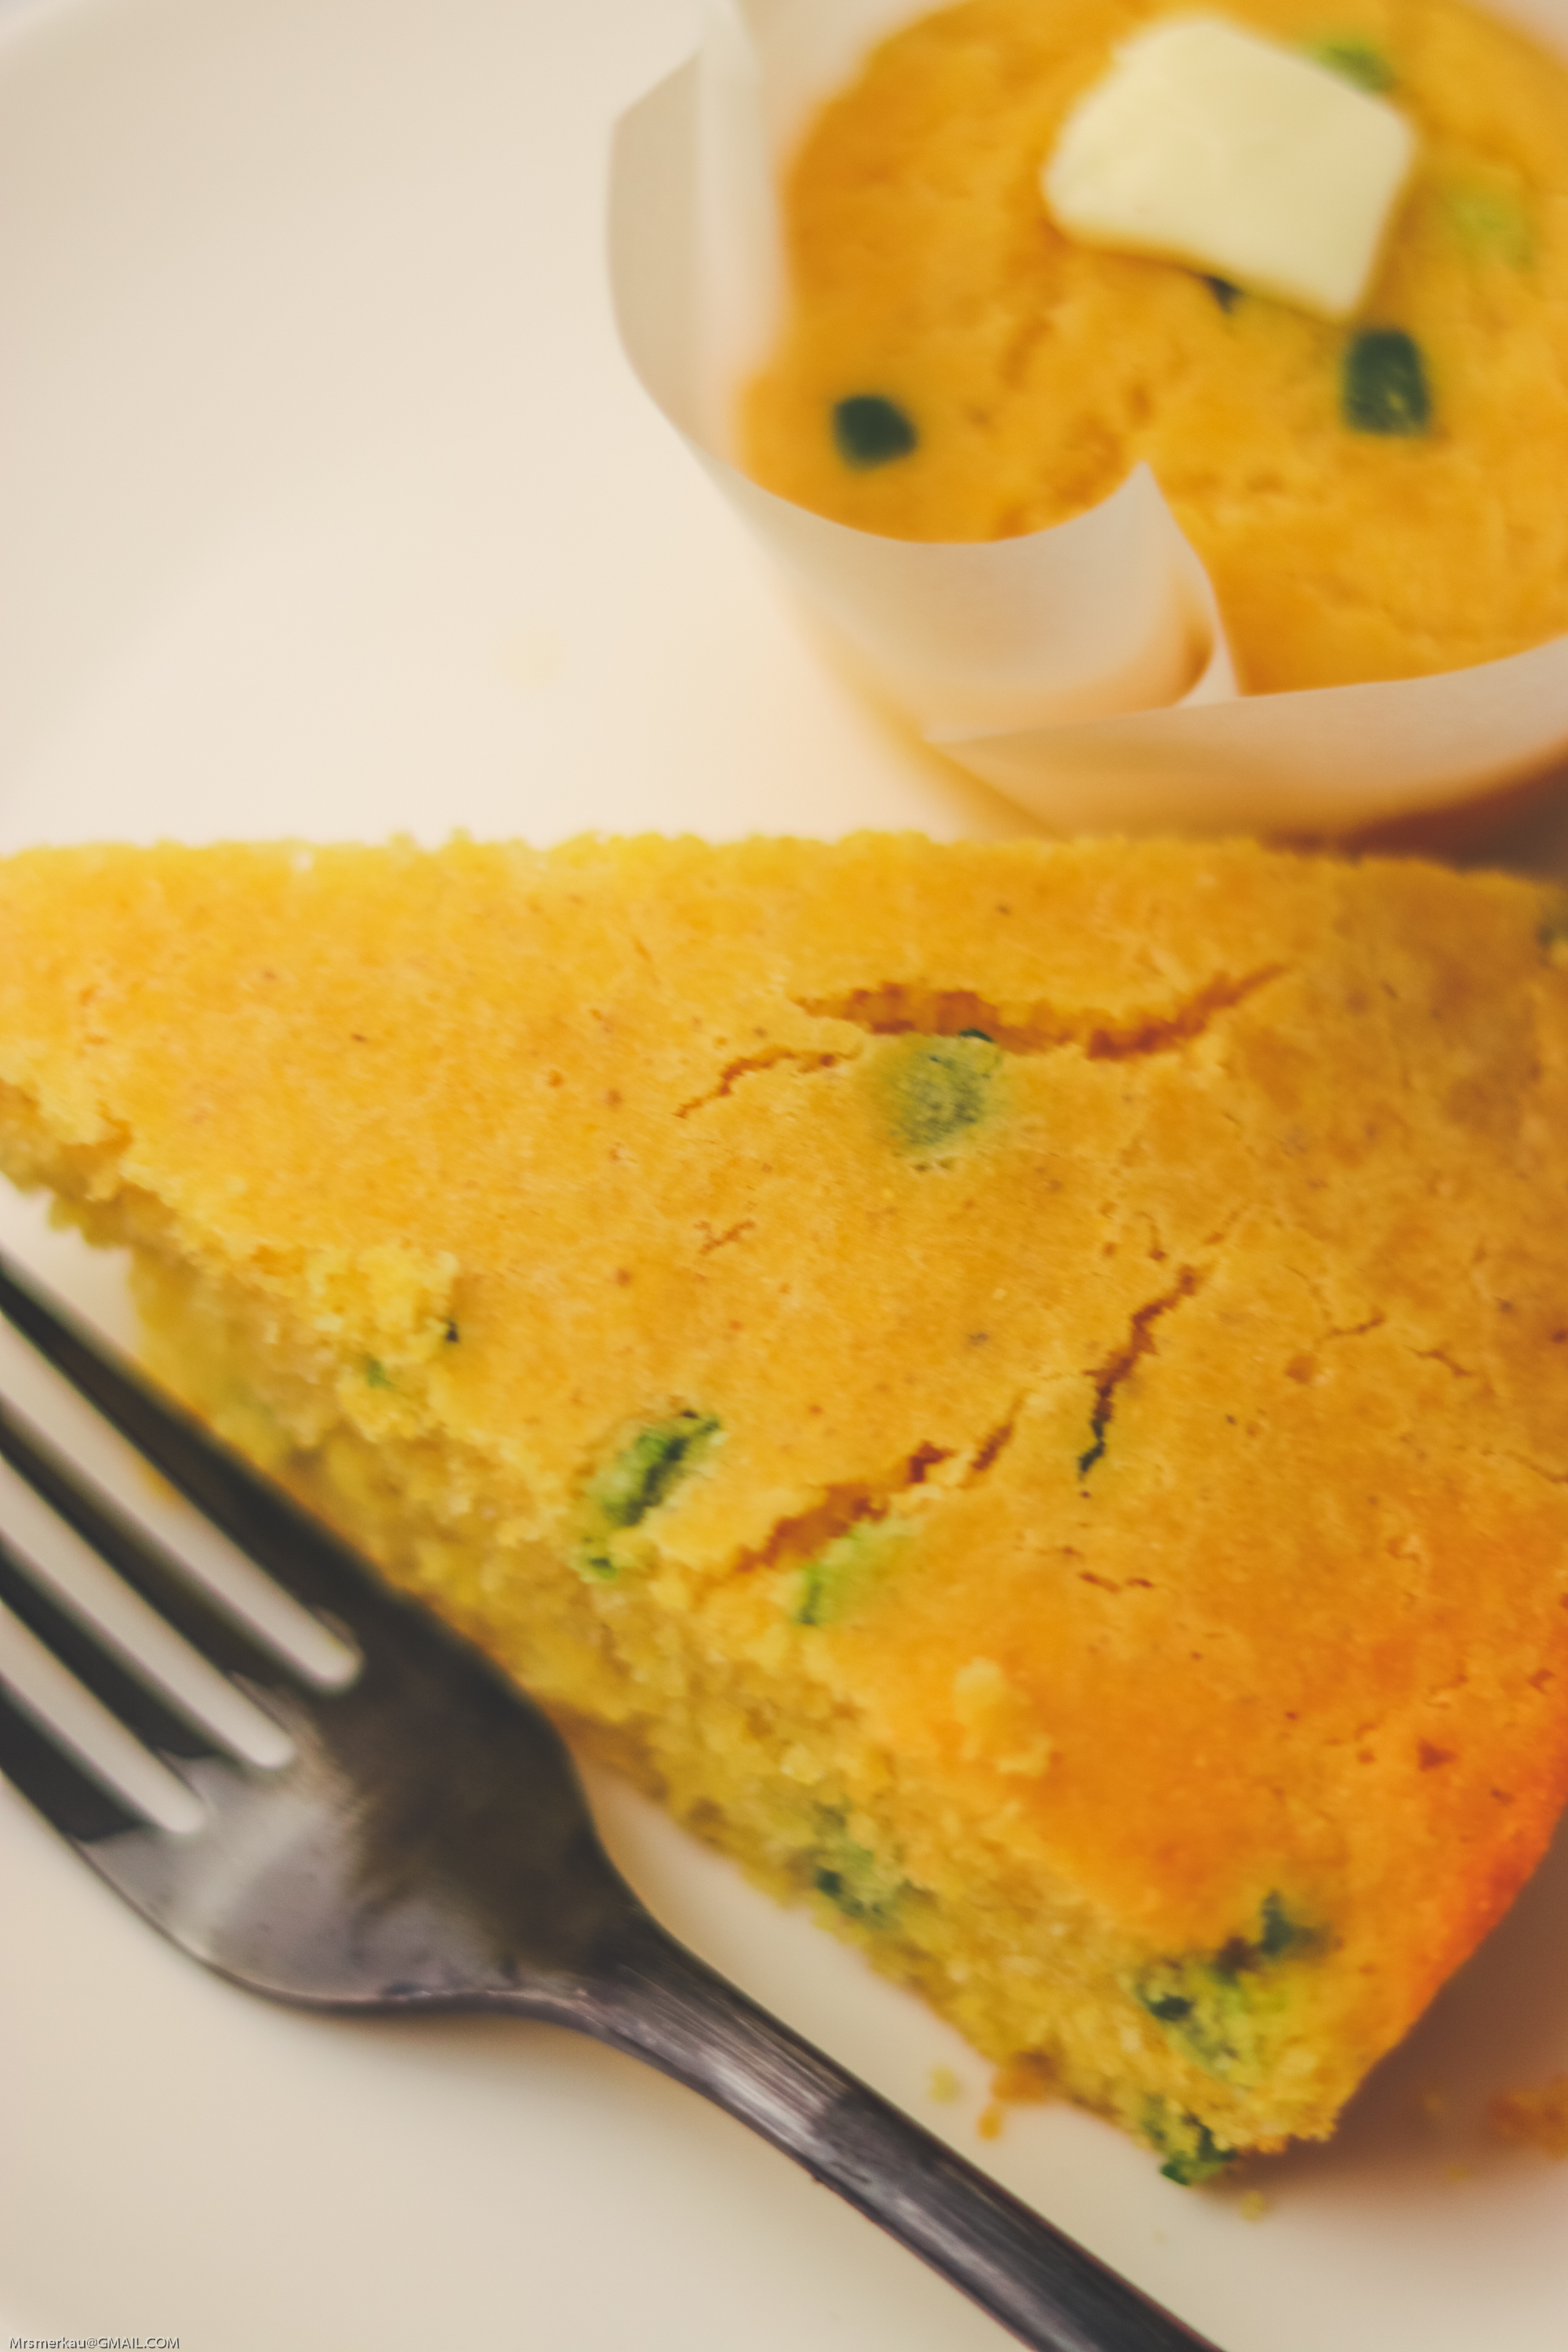 Jalapeno Skillet Cornbread Recipe - This cornbread skillet recipe is the easiest and best tasting cornbread. Seasoned with jalapeno peppers, this cornbread recipe makes an amazing side dish to any of your favorite meals. 